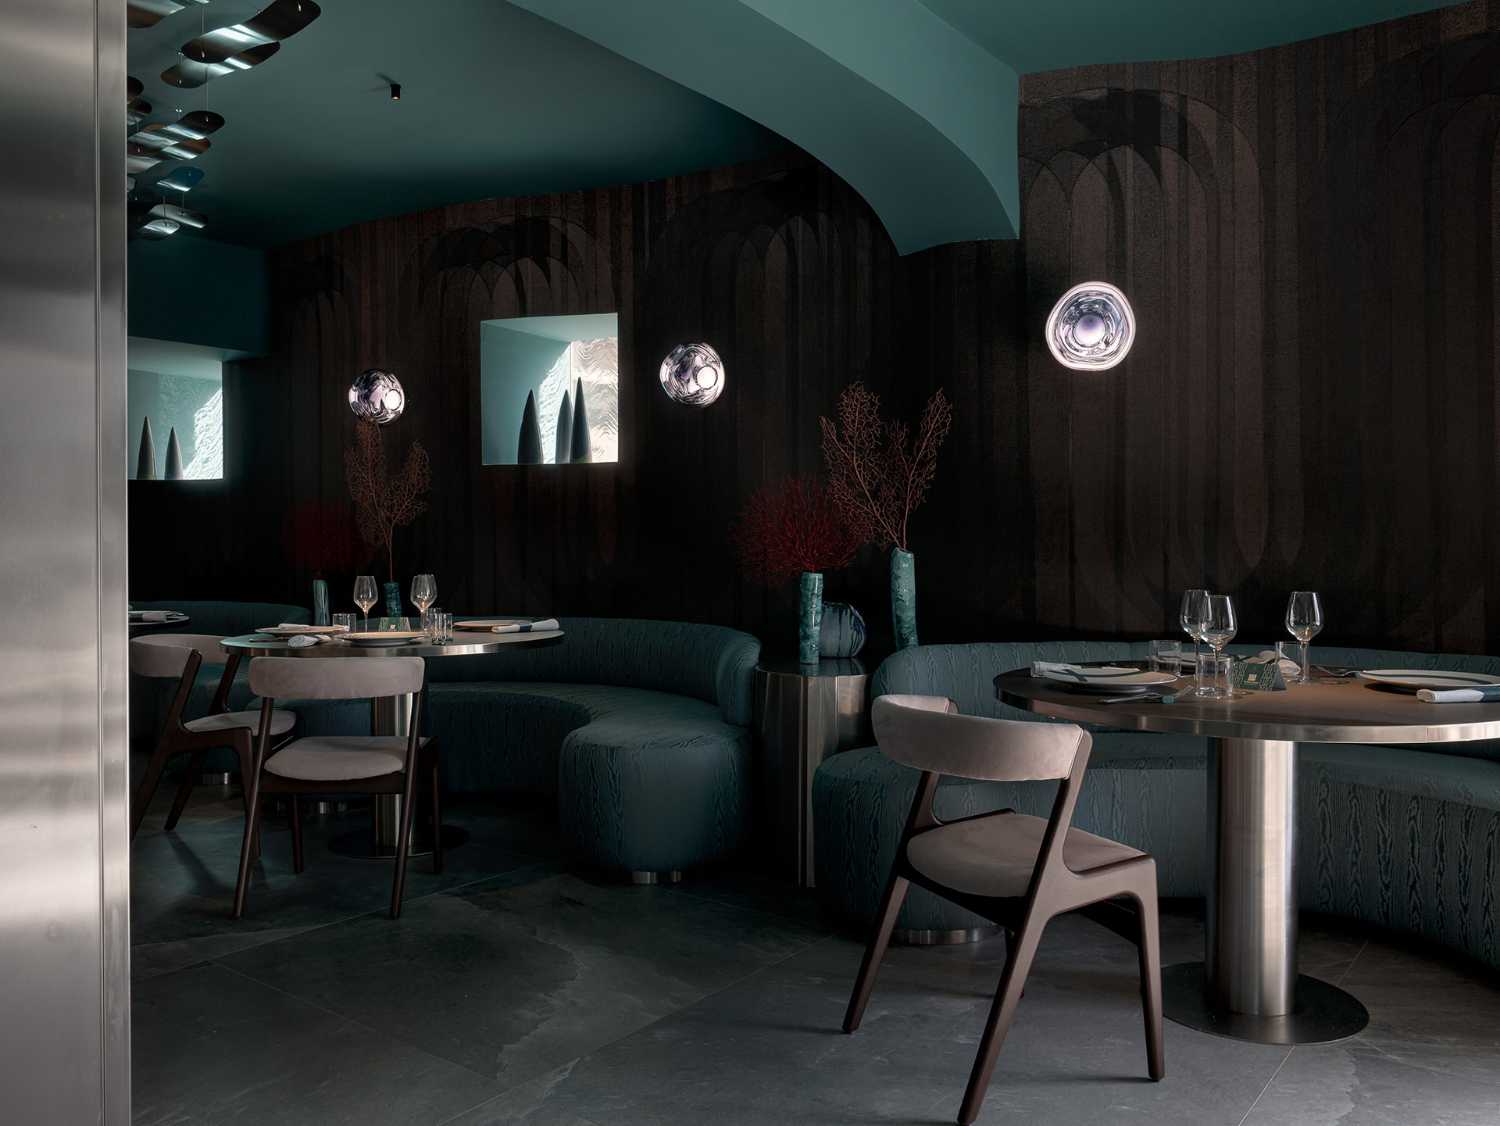 Aqua, drink in restaurant: an interior design projecting us into a wreck at the bottom of the sea